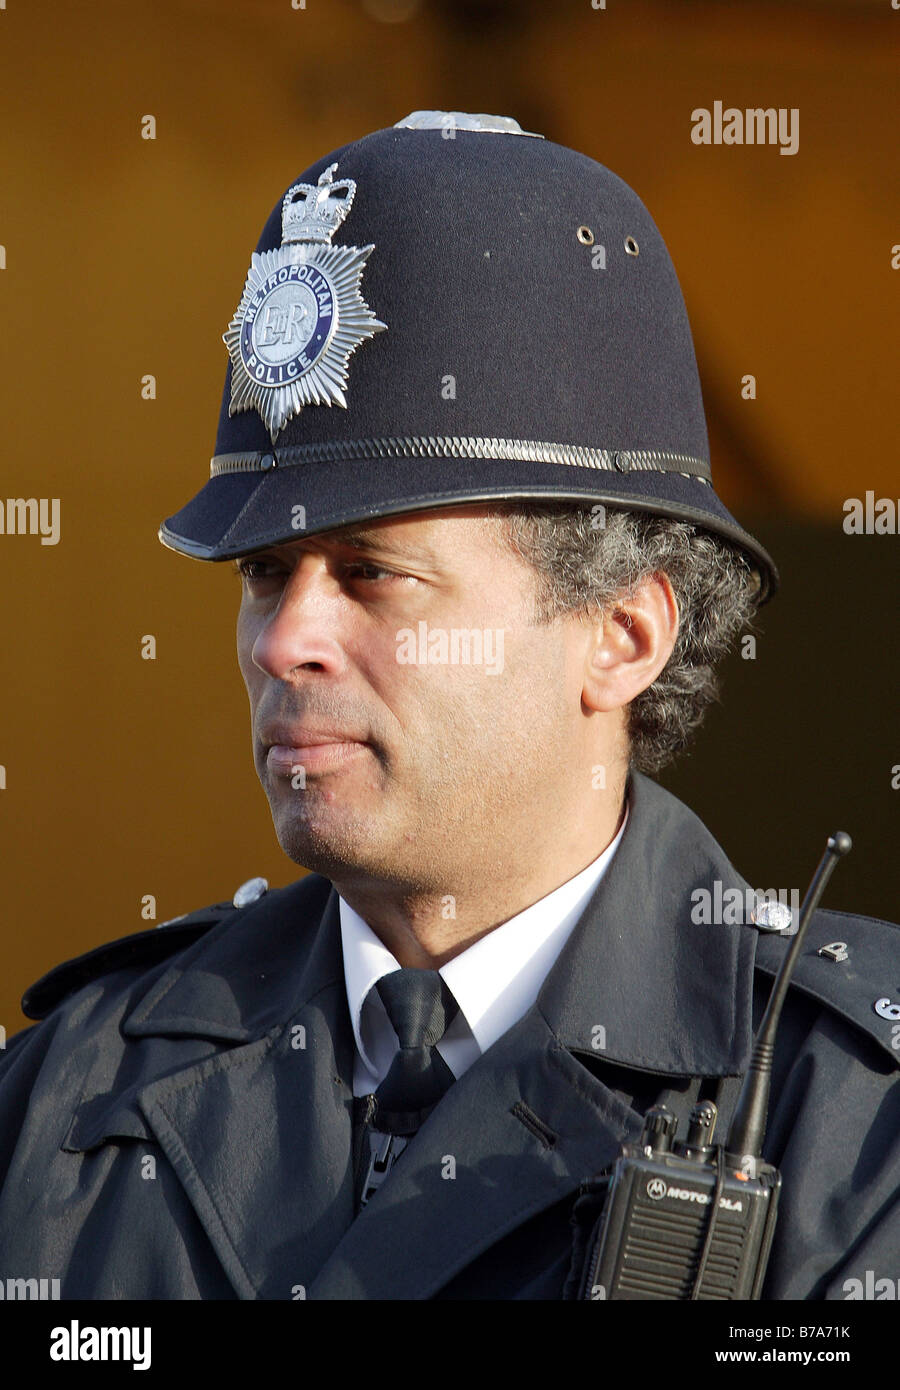 Uniformed policeman in London, England, Great Britain, Europe Stock Photo